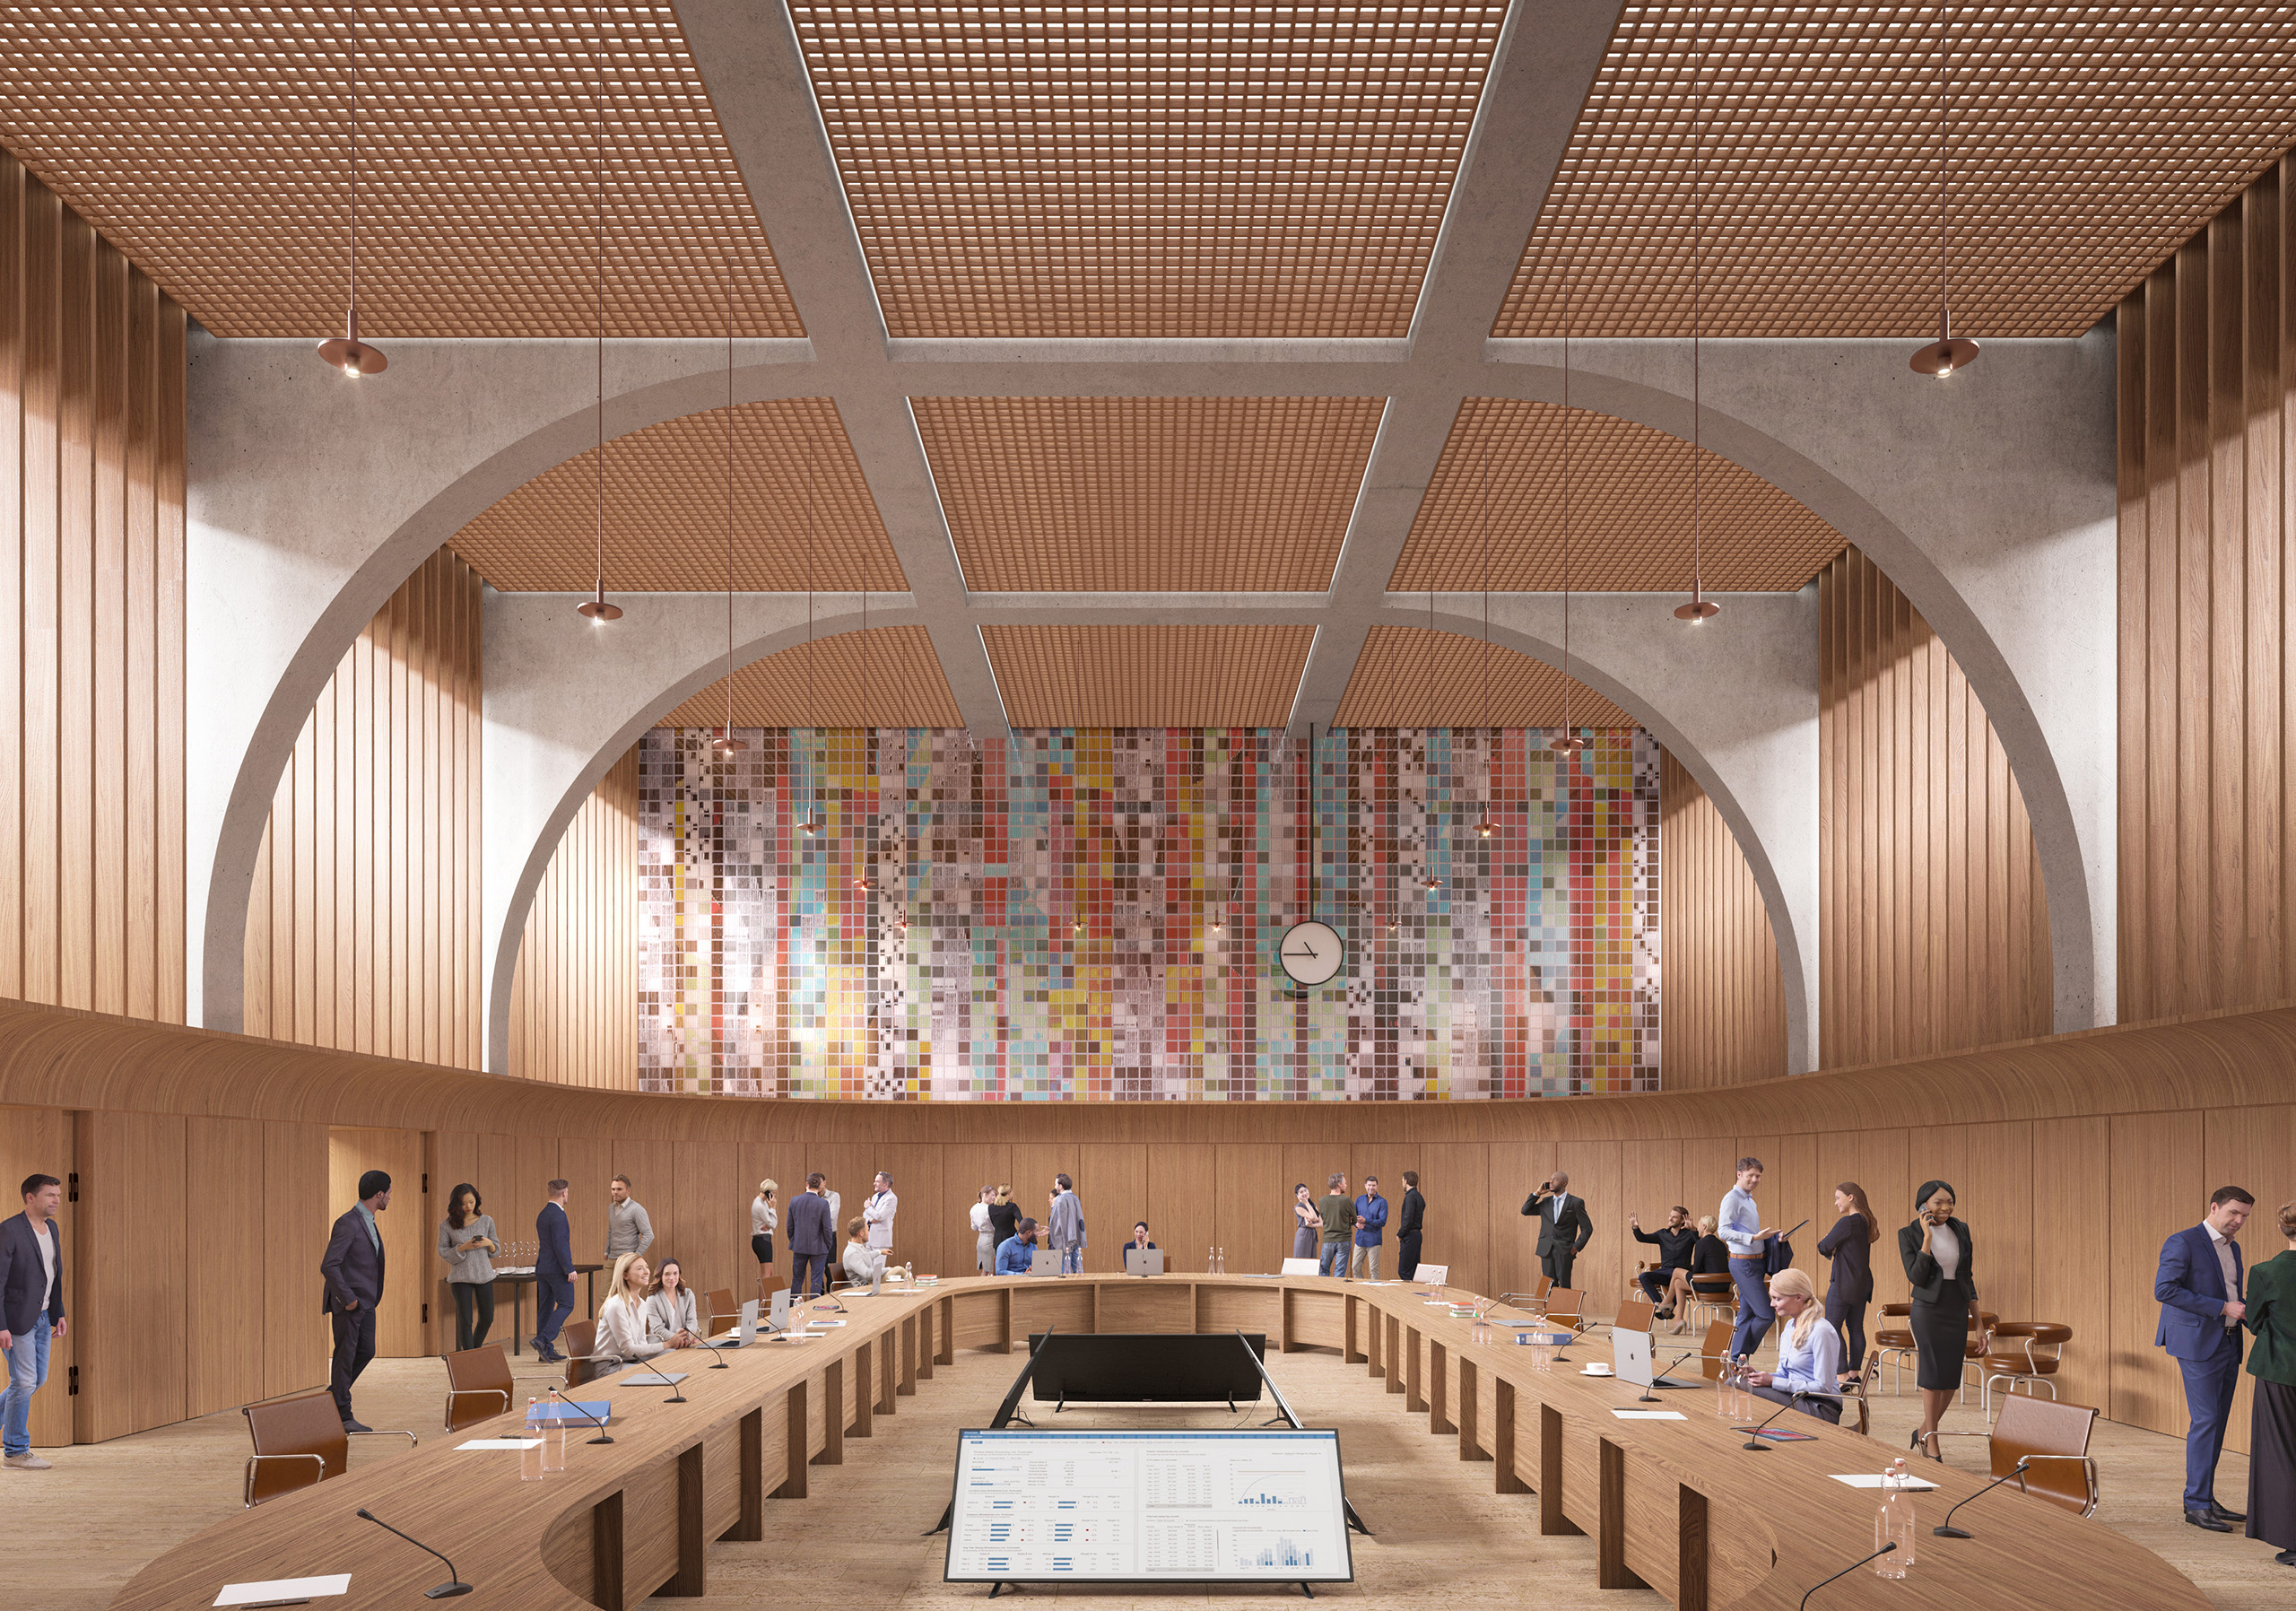 Conceptual rendering of the committee room, showcasing the open and spacious design